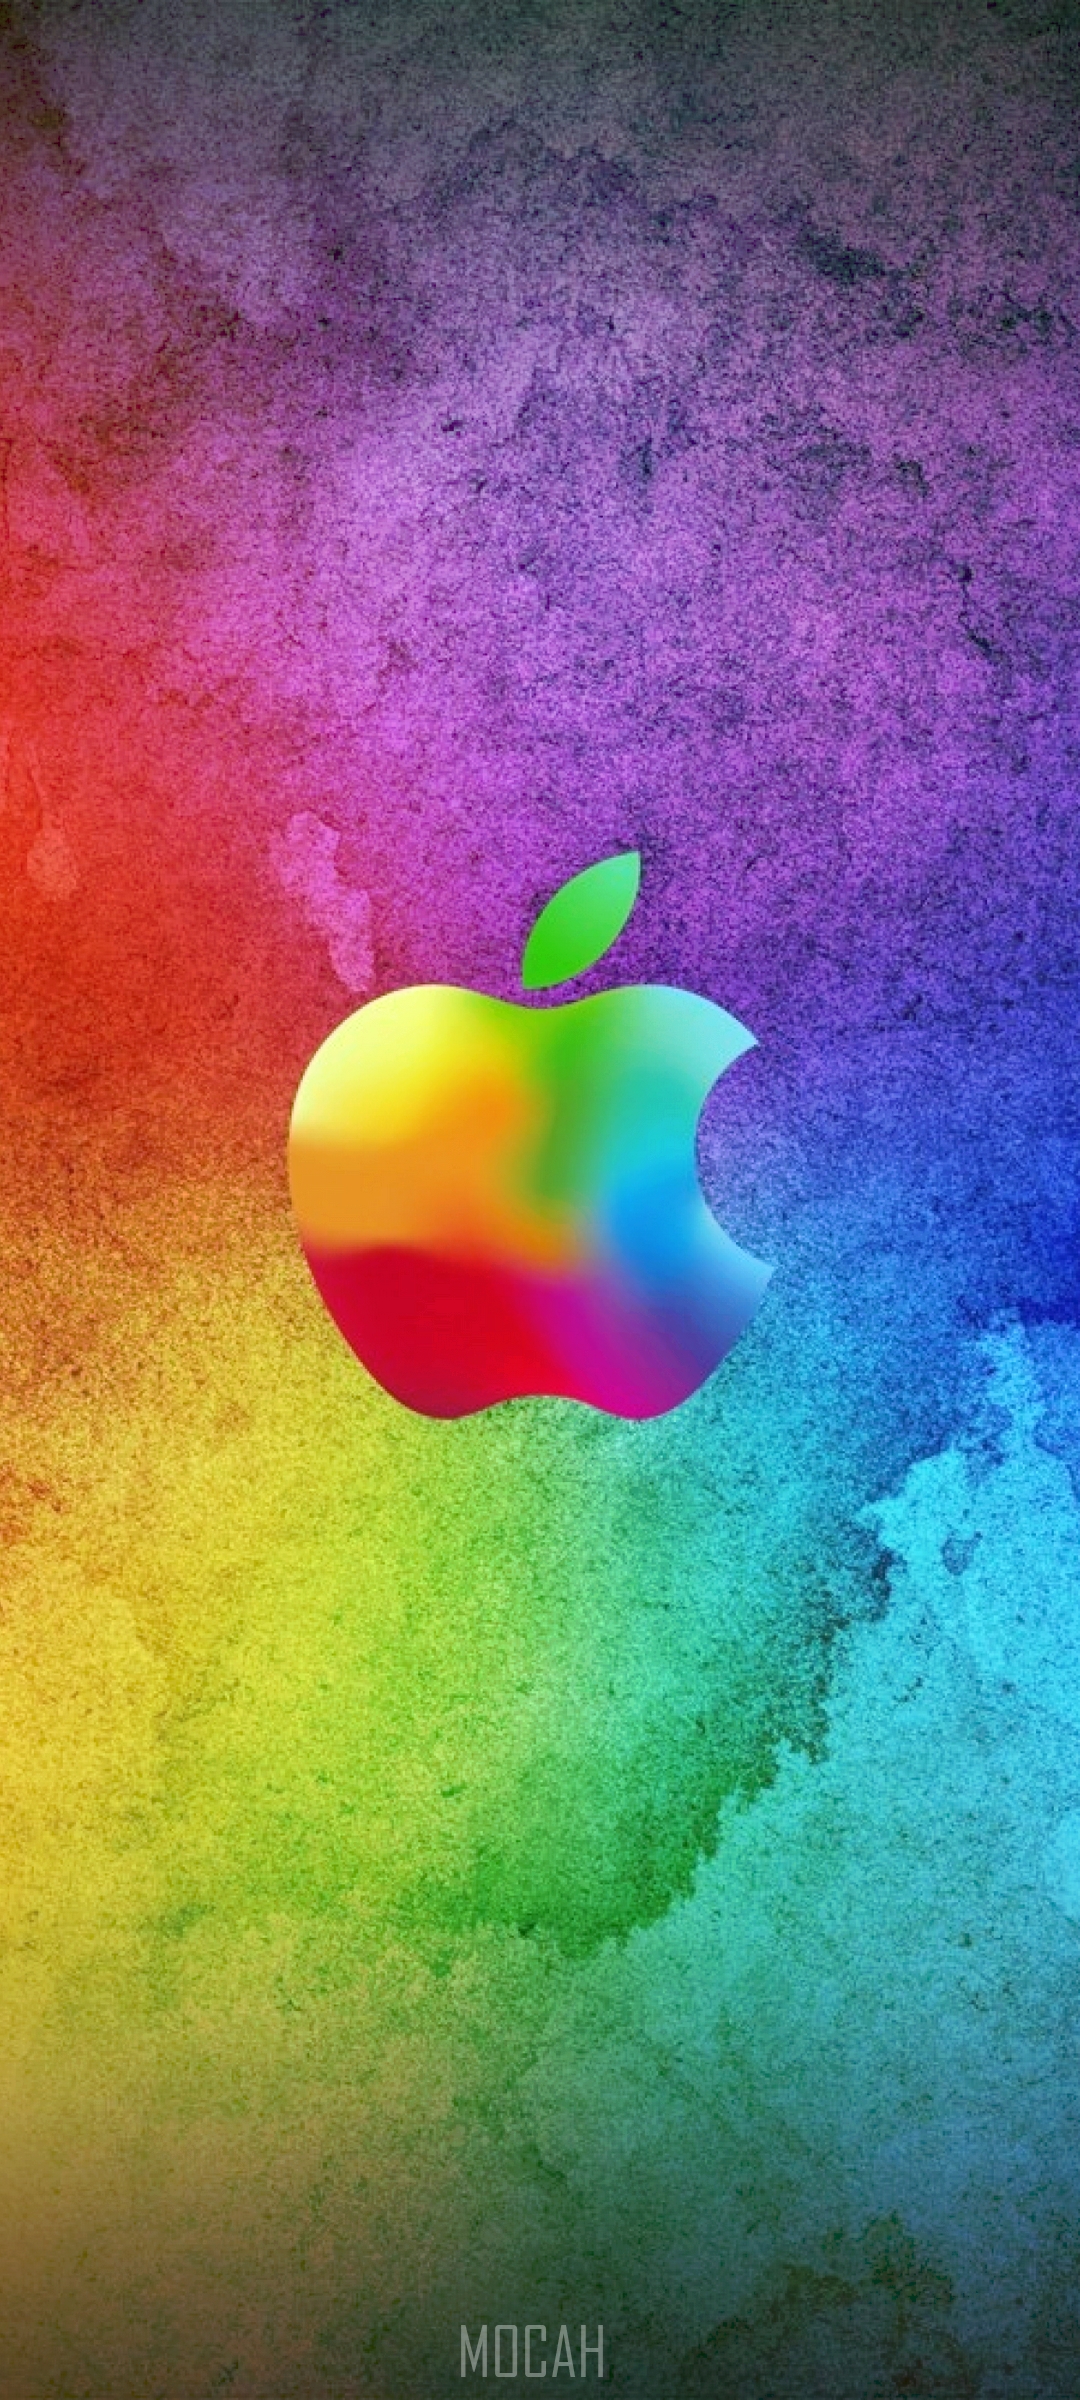 Apple, Ios, Green, Red, Colorfulness, Oppo Find X2 Neo background hd, 1080x2400 Gallery HD Wallpaper